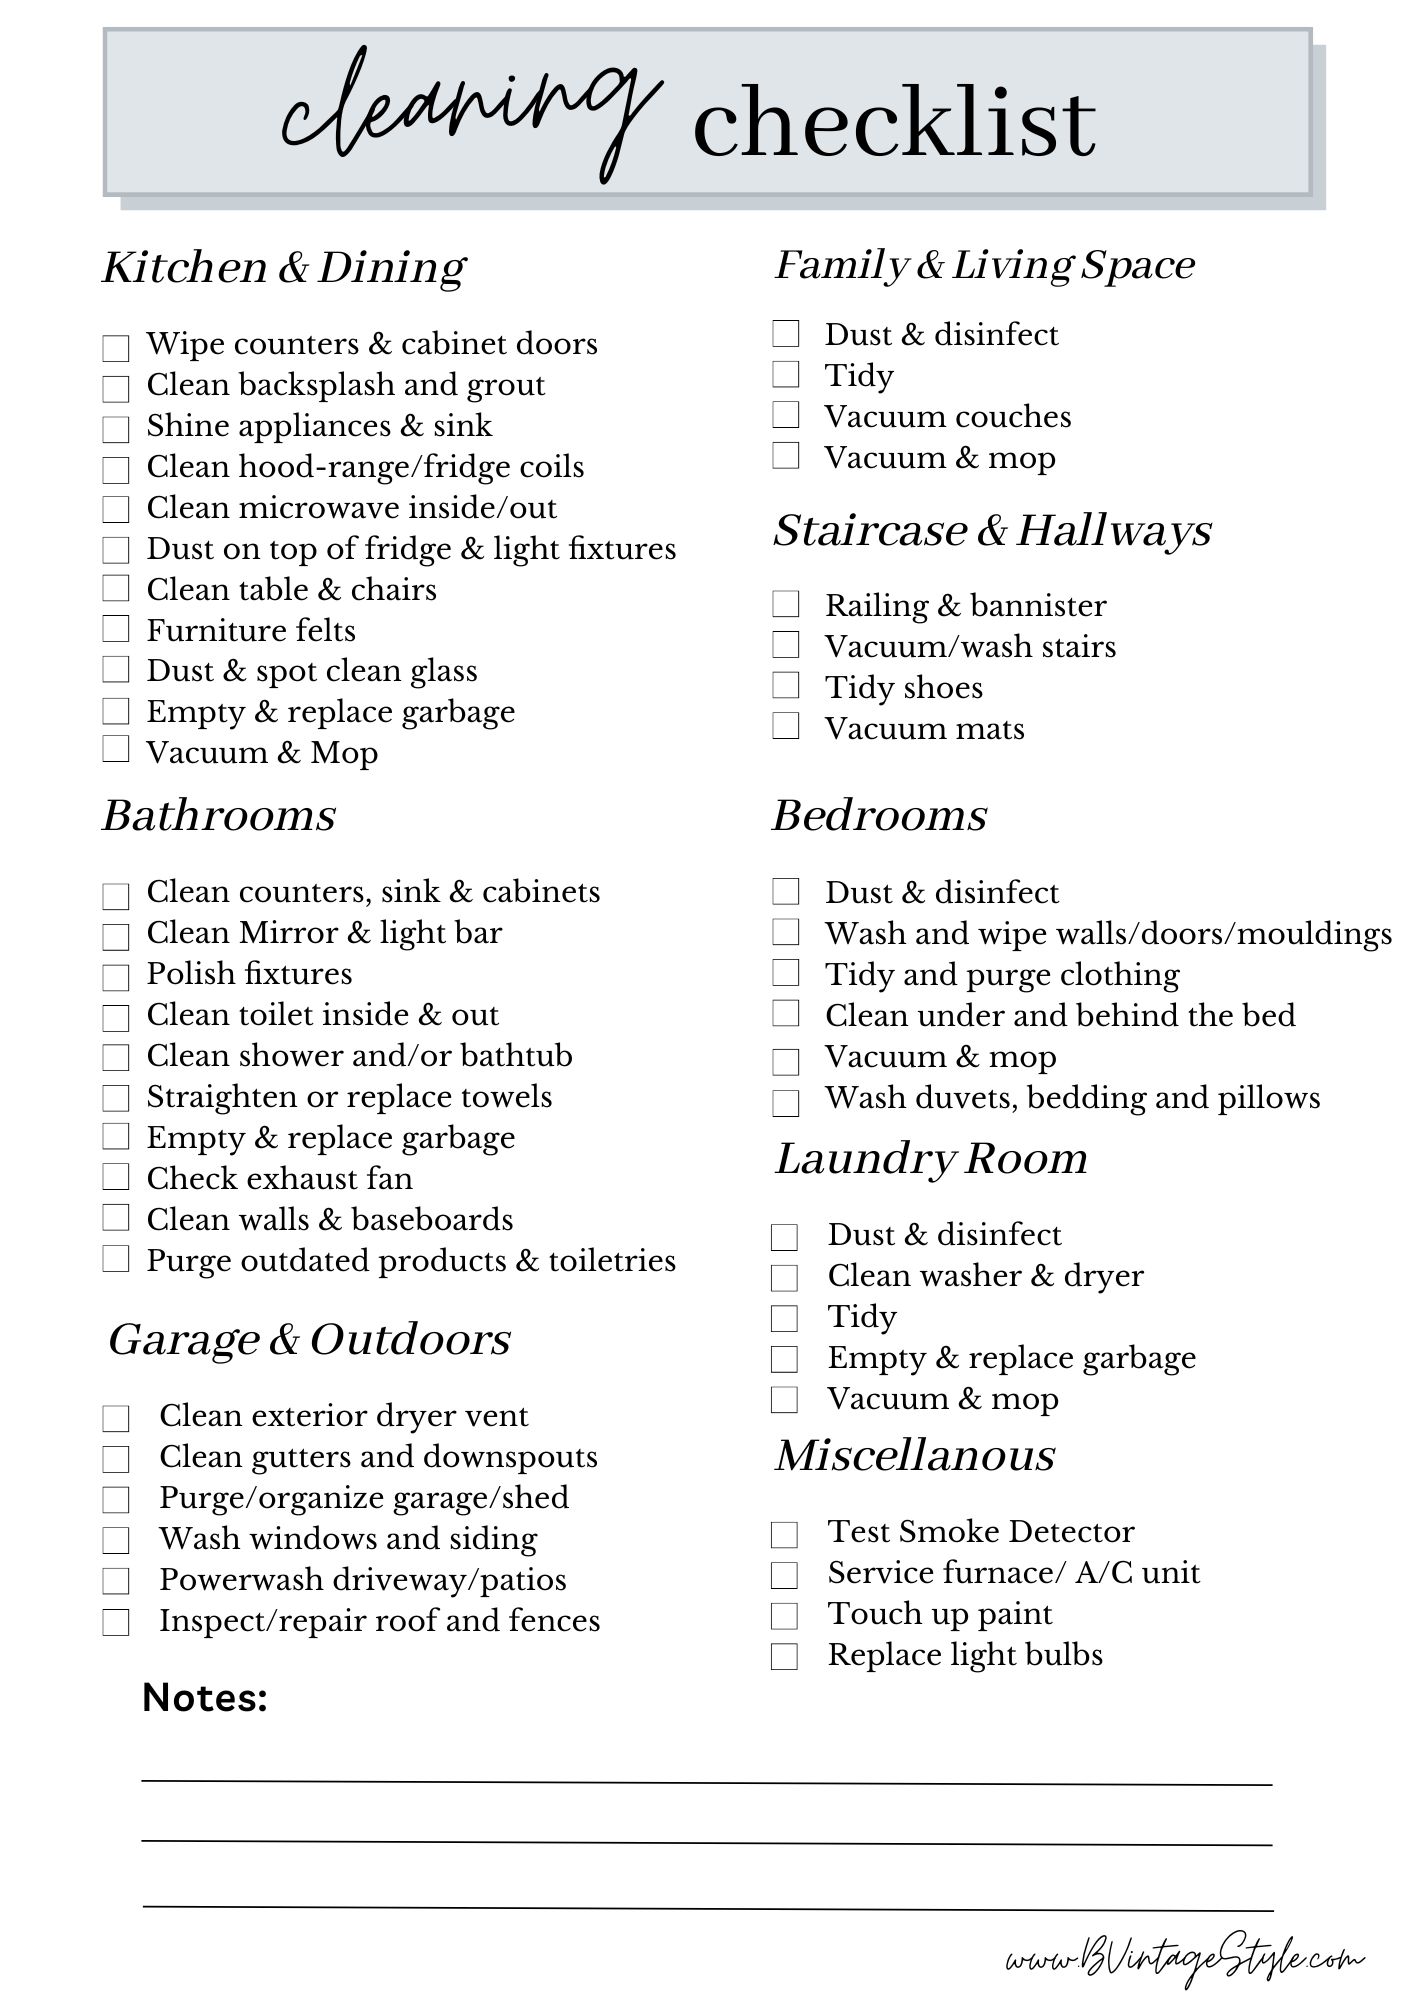 Cleaning Checklist | B Vintage Style